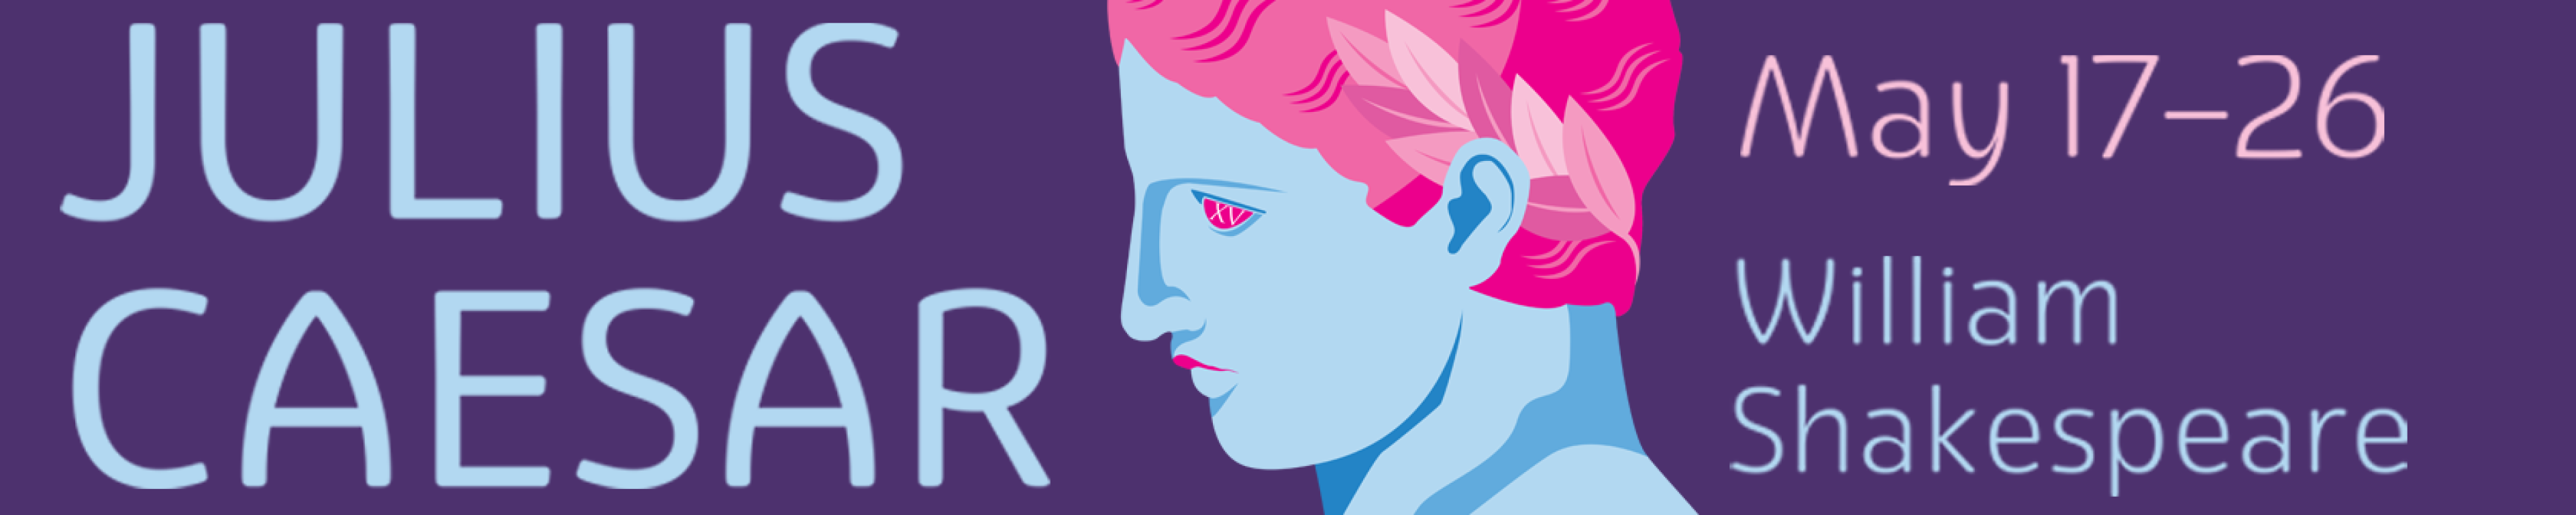 Purple background with a roman figure in blue with pink hair and features blue letters with Julius Caesar and May 17 through 26.